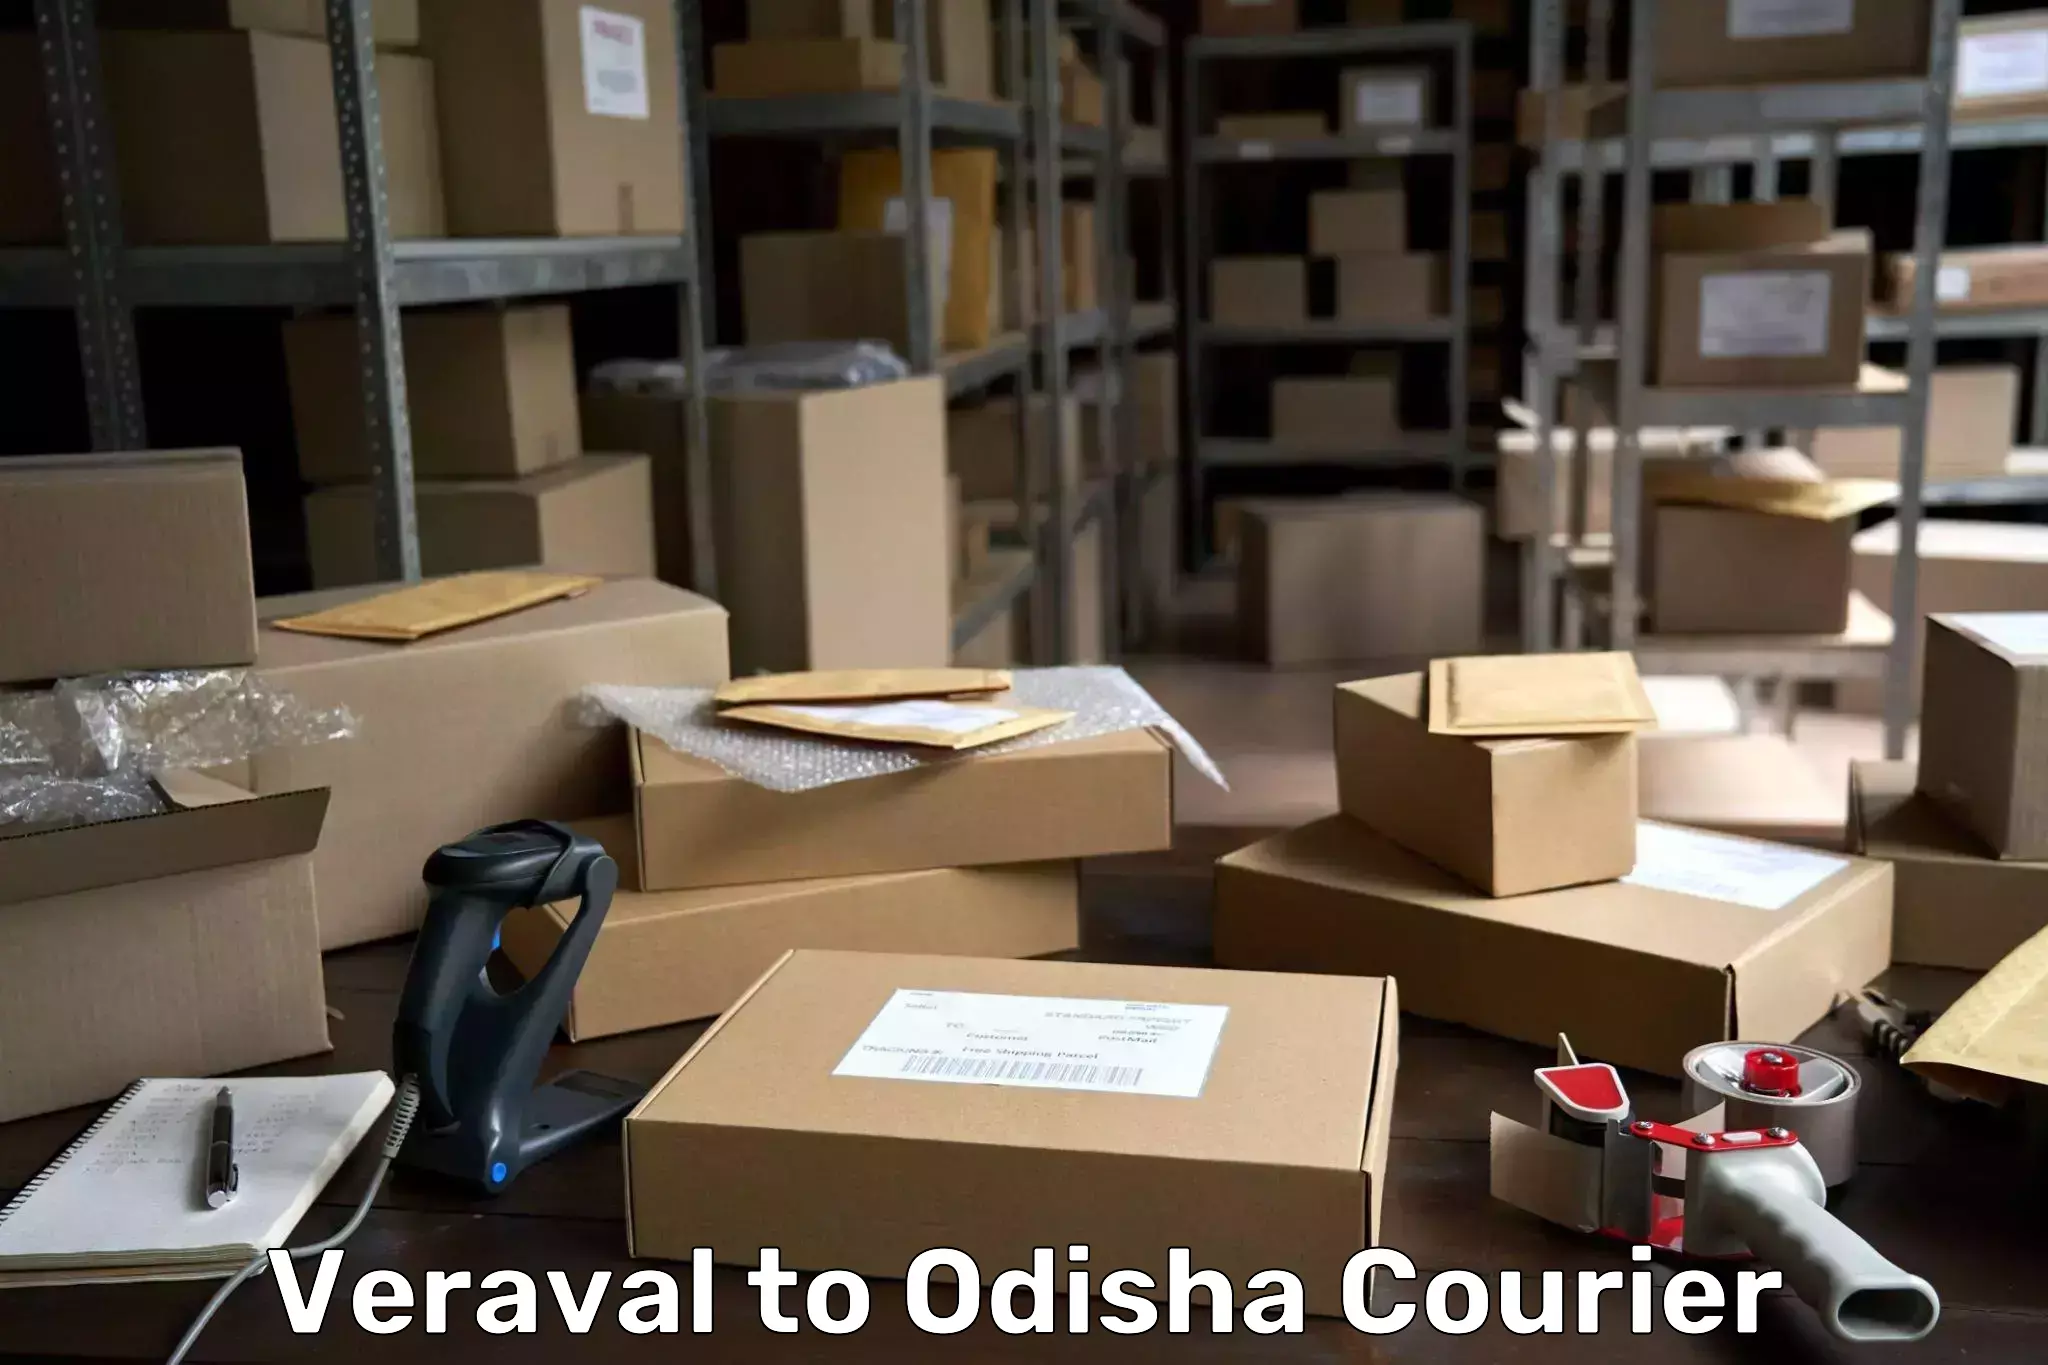 High-priority parcel service Veraval to Asika